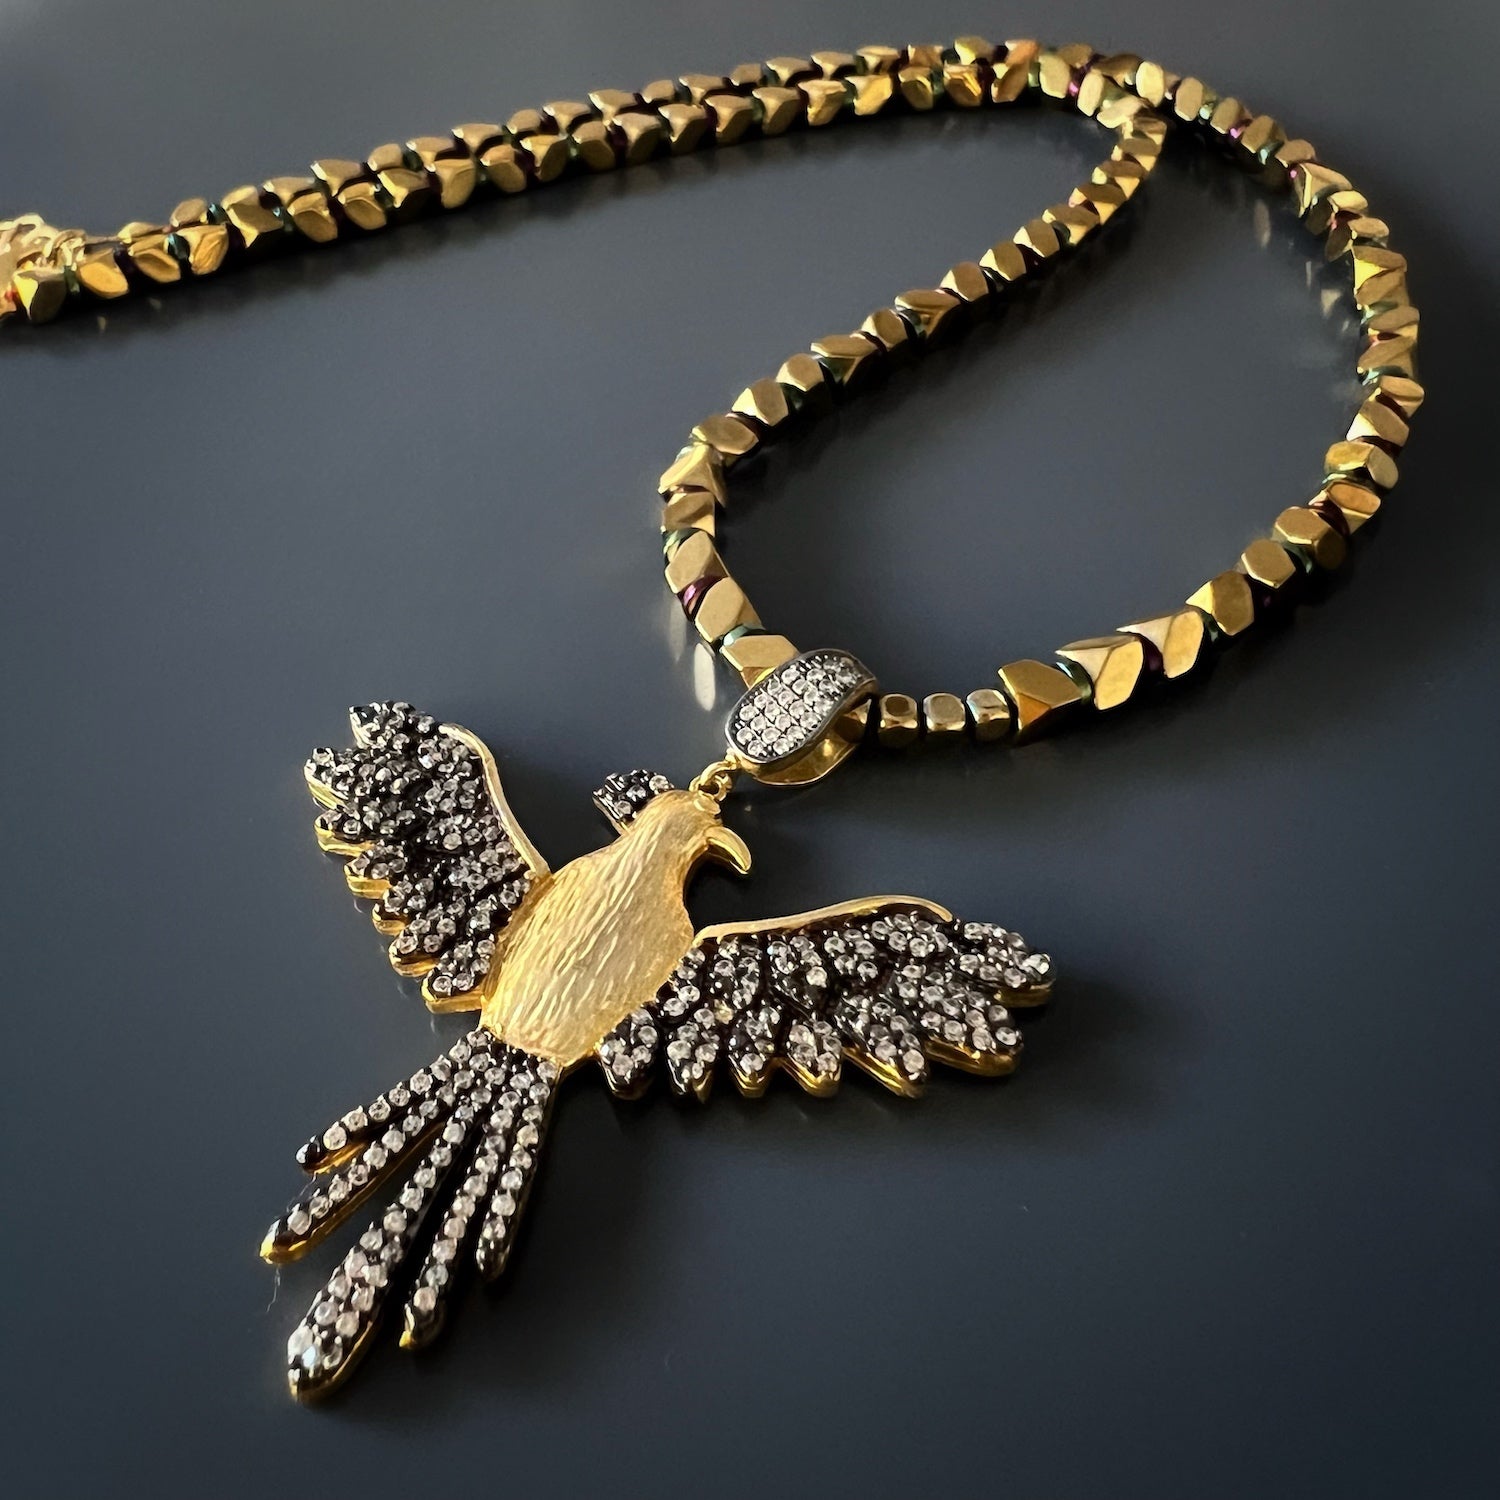 An elegant necklace with a Phoenix pendant, symbolizing everlasting beauty and transformation.